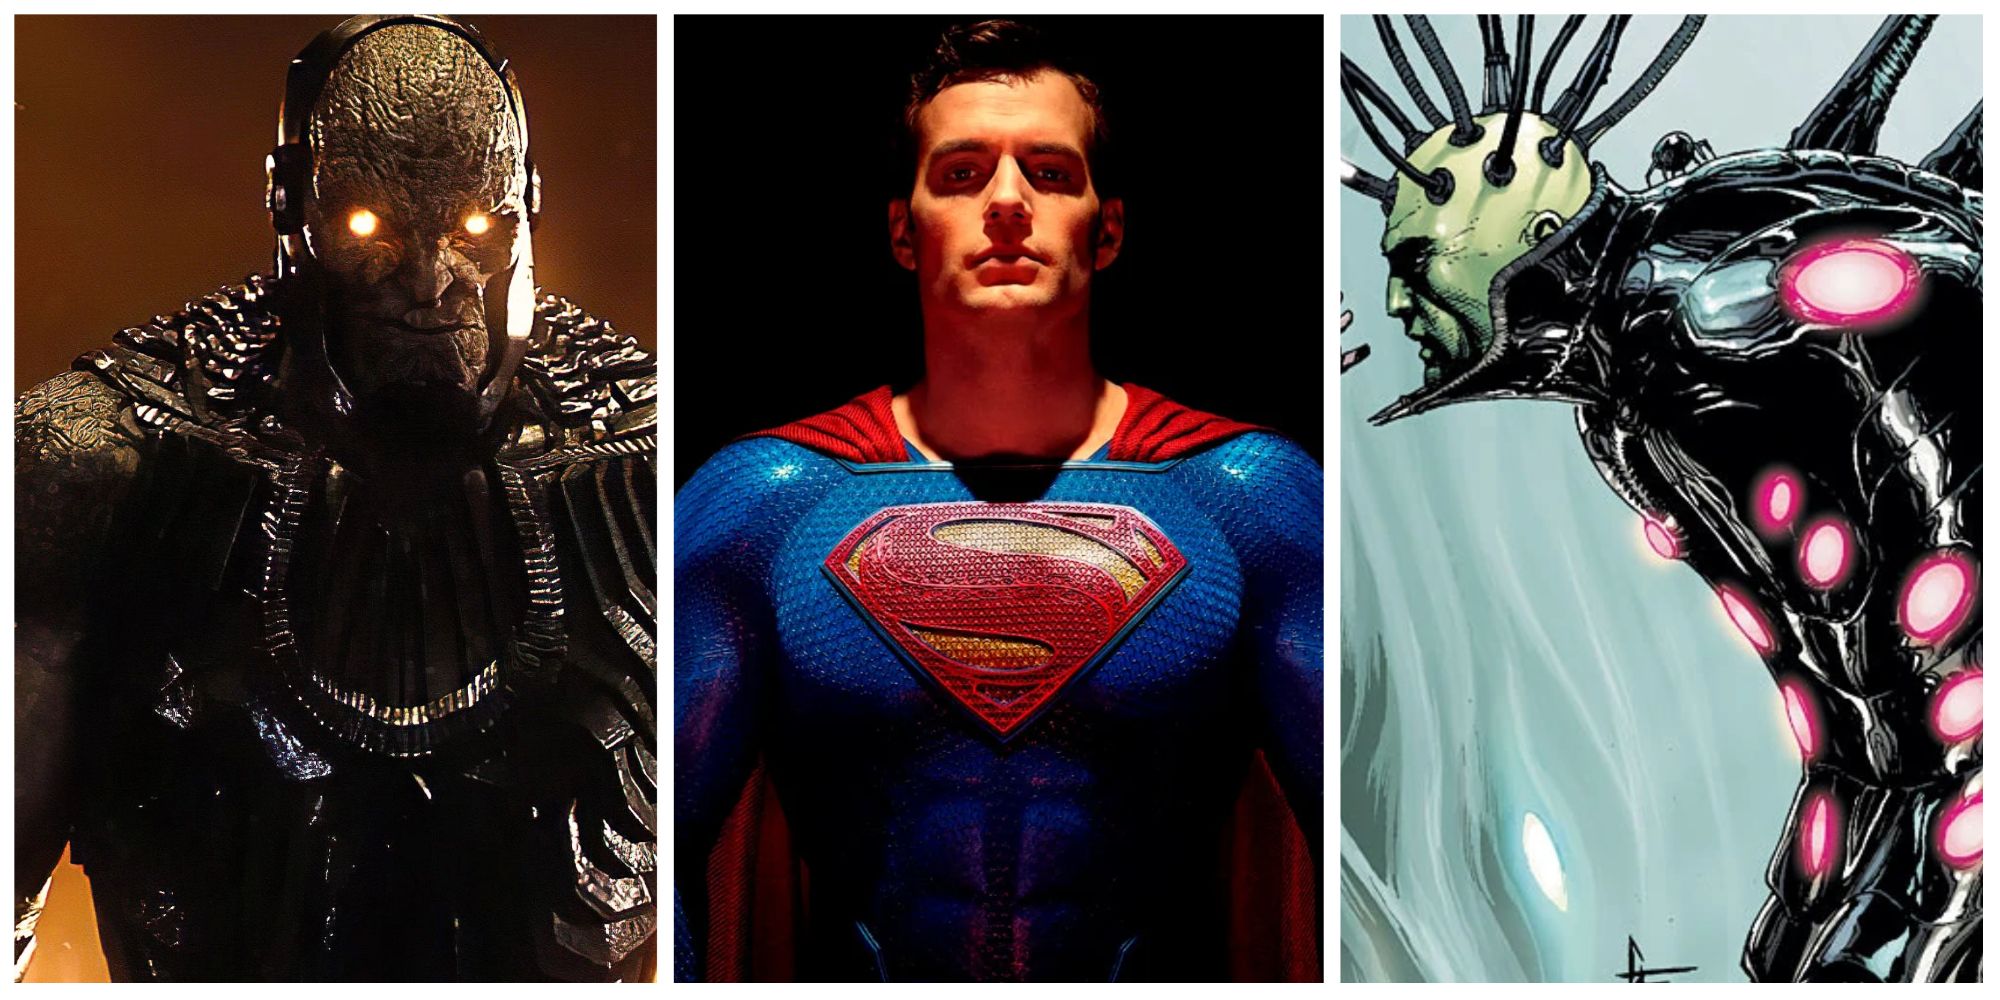 henry cavill superman, darkseid zack snyder's justice league and brainiac from dc comics